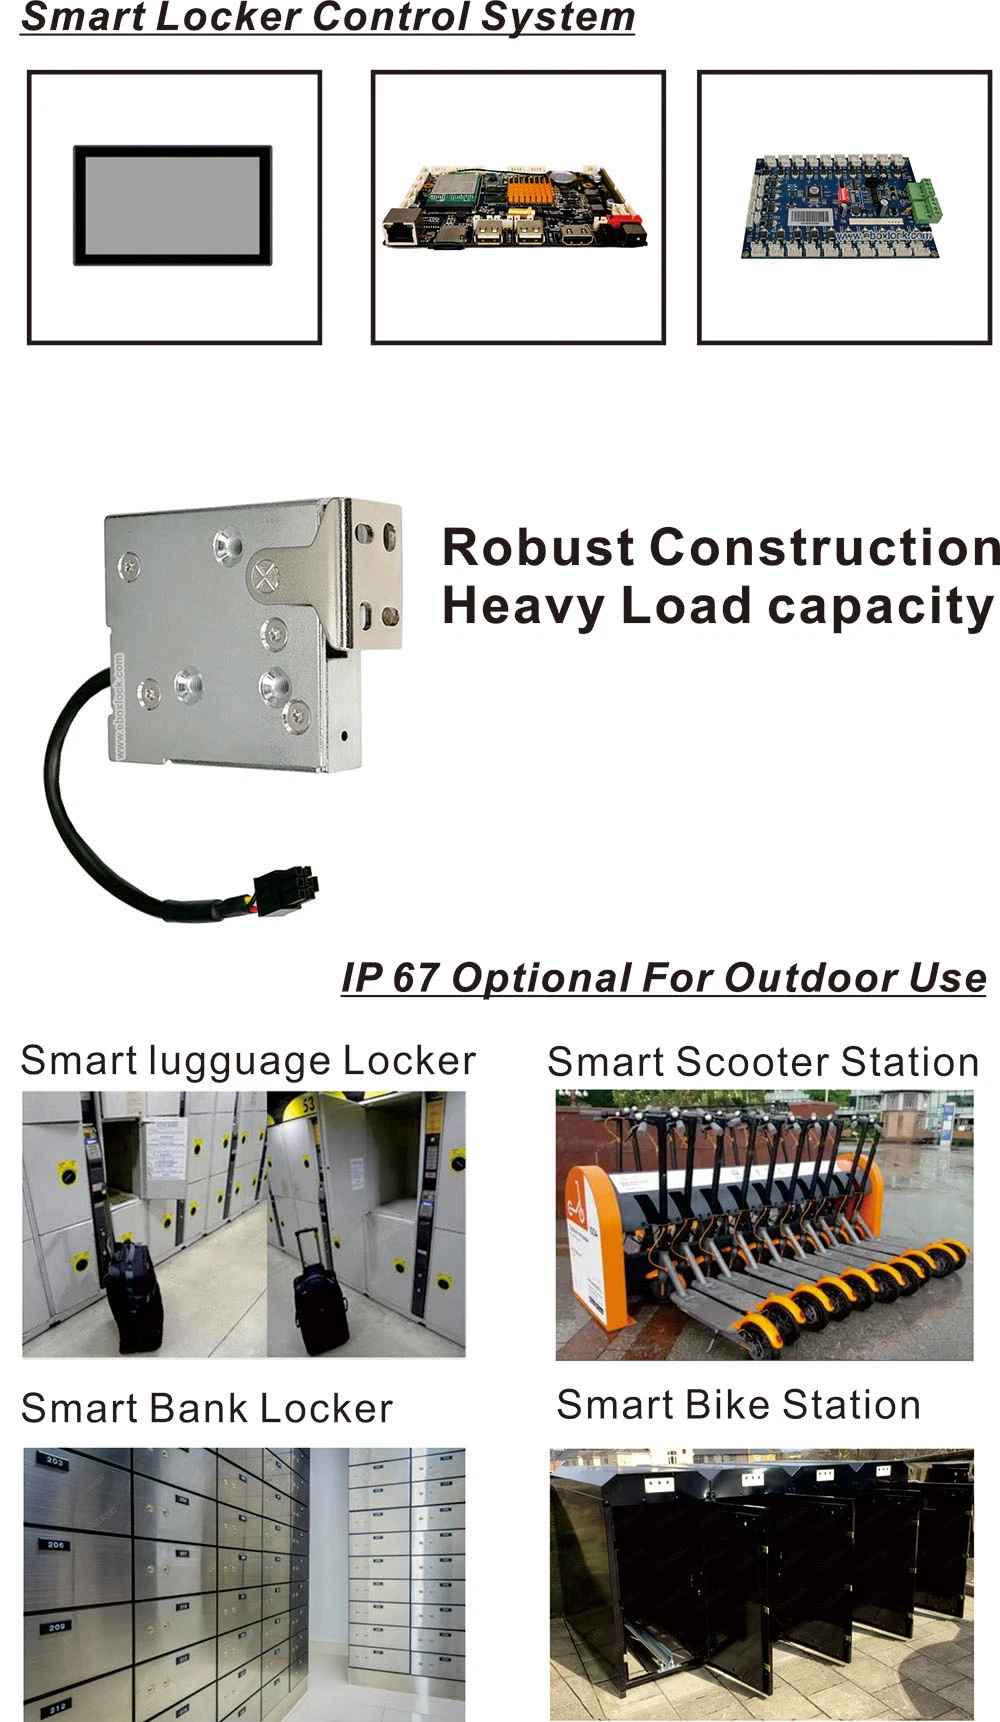 Outdoor Smart Locker Lock for Vending Machines and Electronic Kiosks